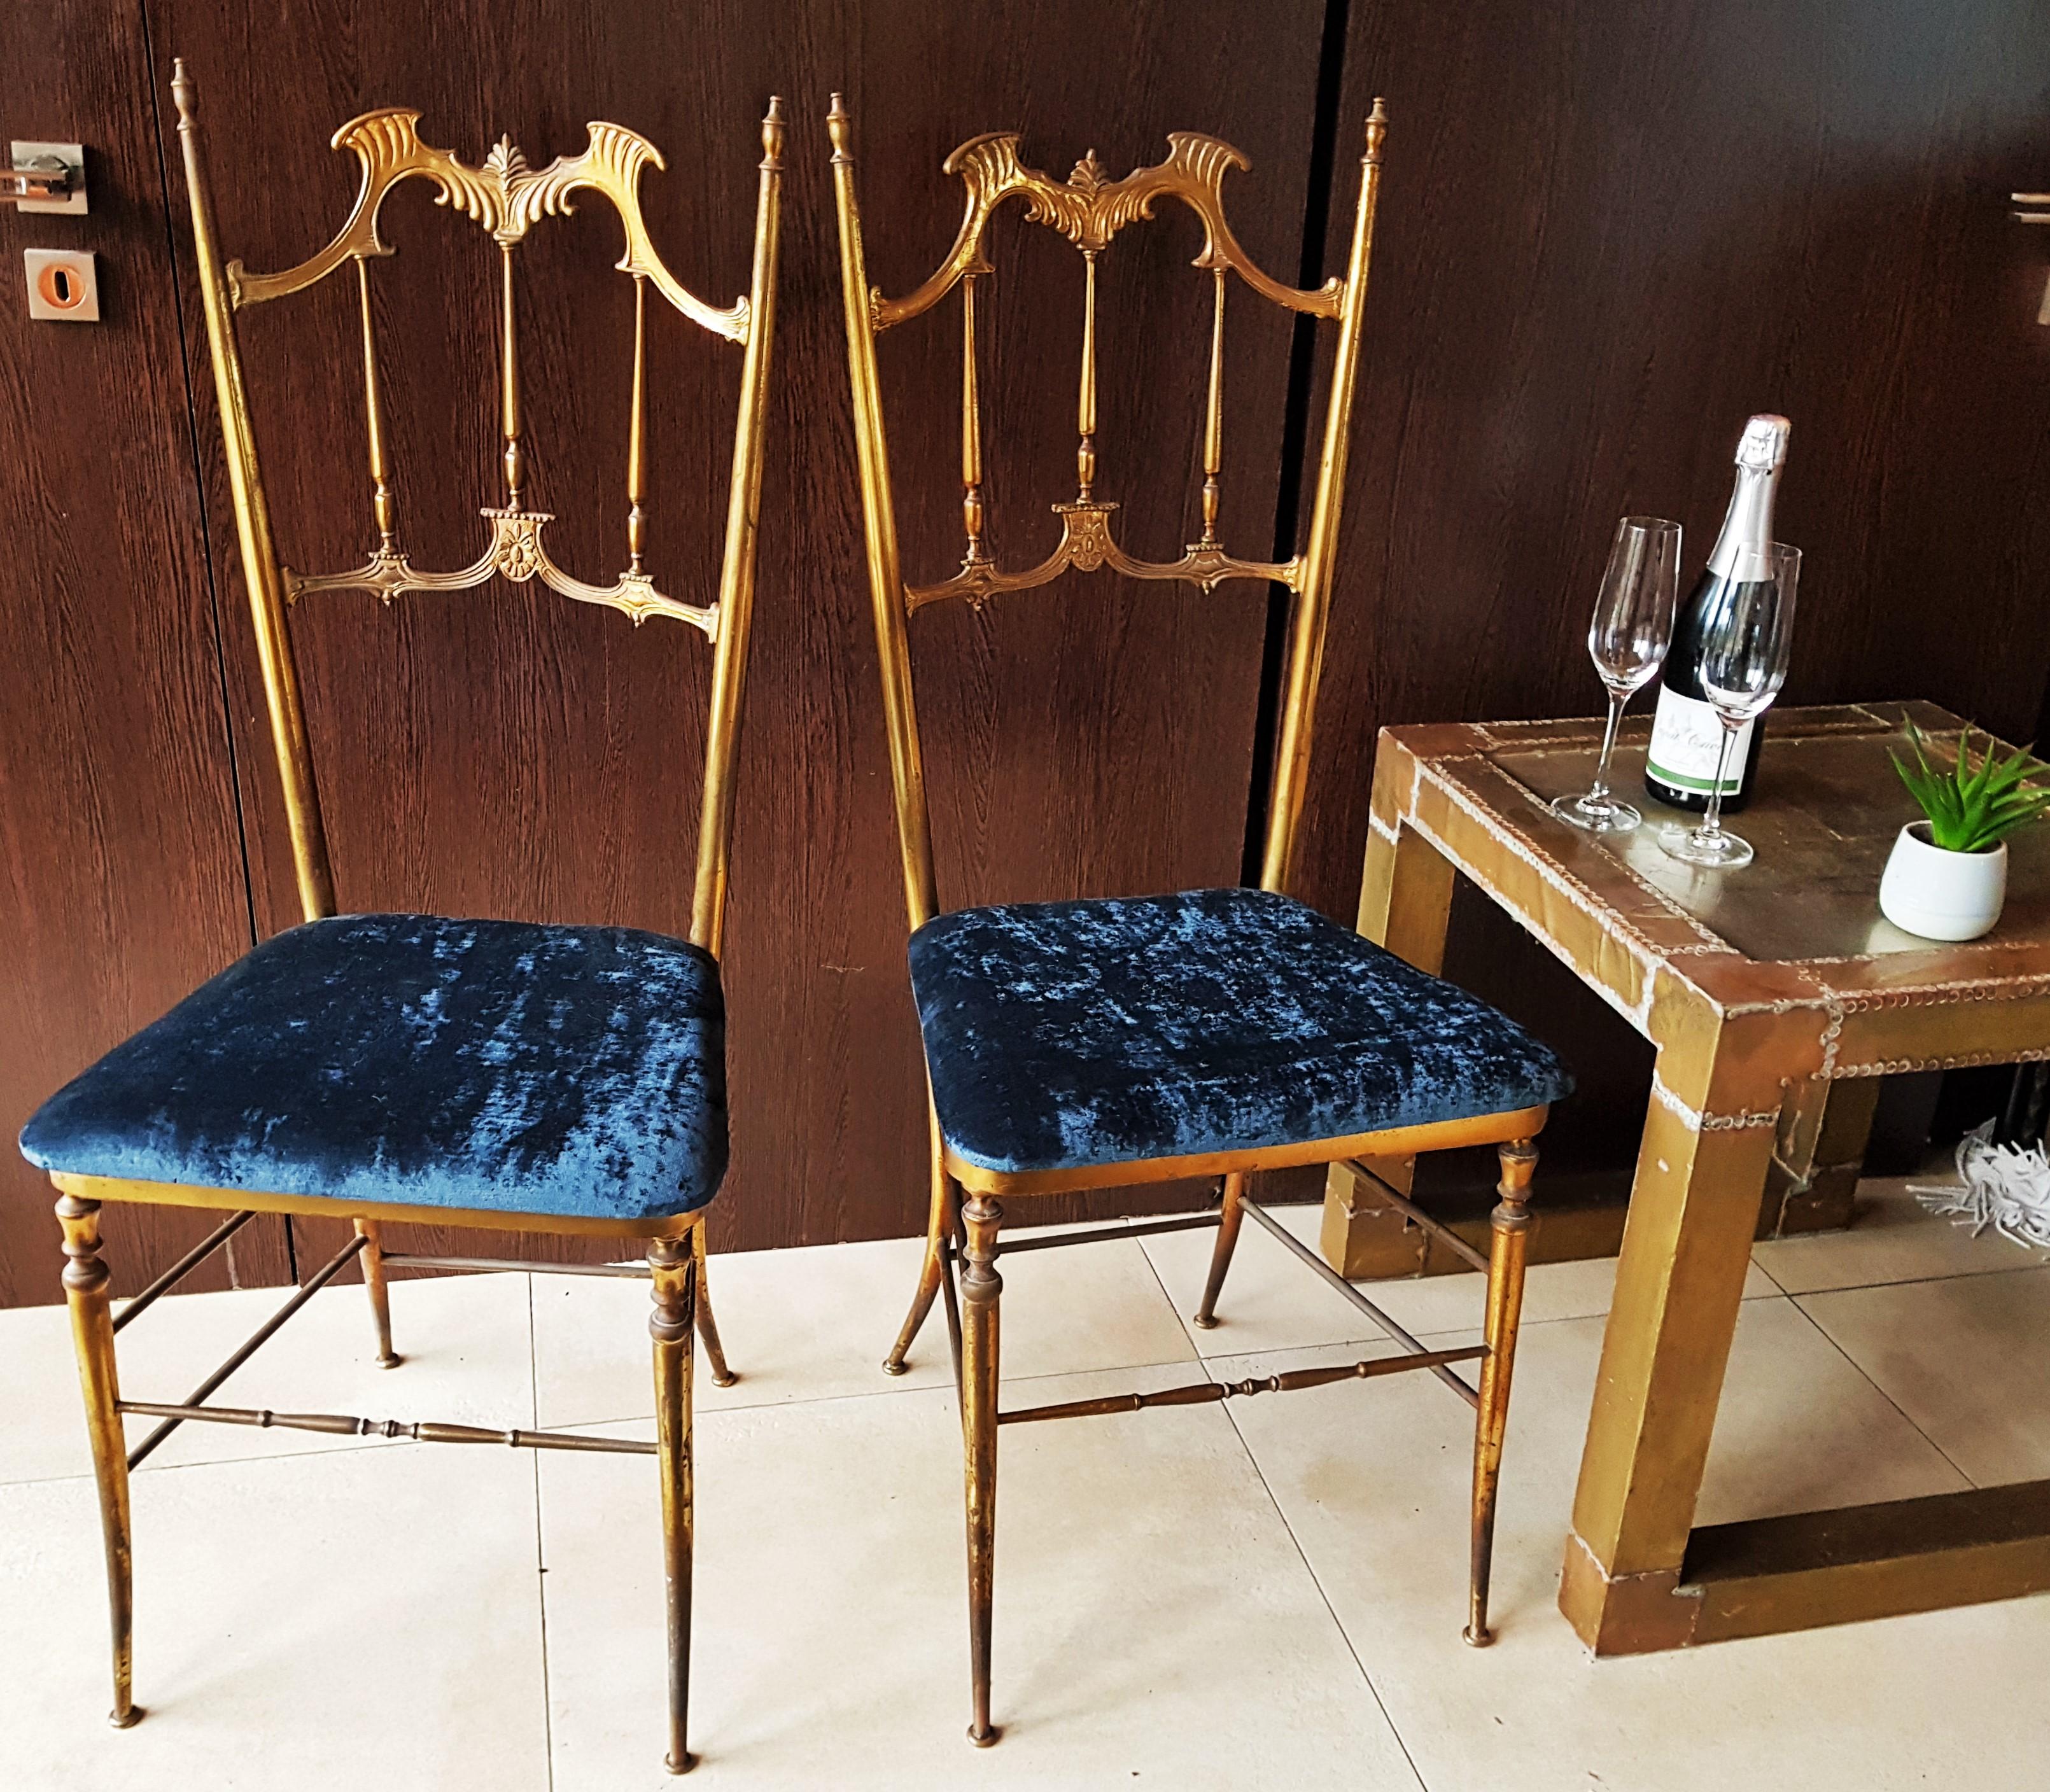 Midcentury pair of brass Italian Chiavari chairs, Italy, 1940s-1950s.

New upholstered with ocean blue Brussels velvet.

Brass with original patina. Stabile and solid!

Originally designed by Giuseppe Gaetano Descalzi and produced since the